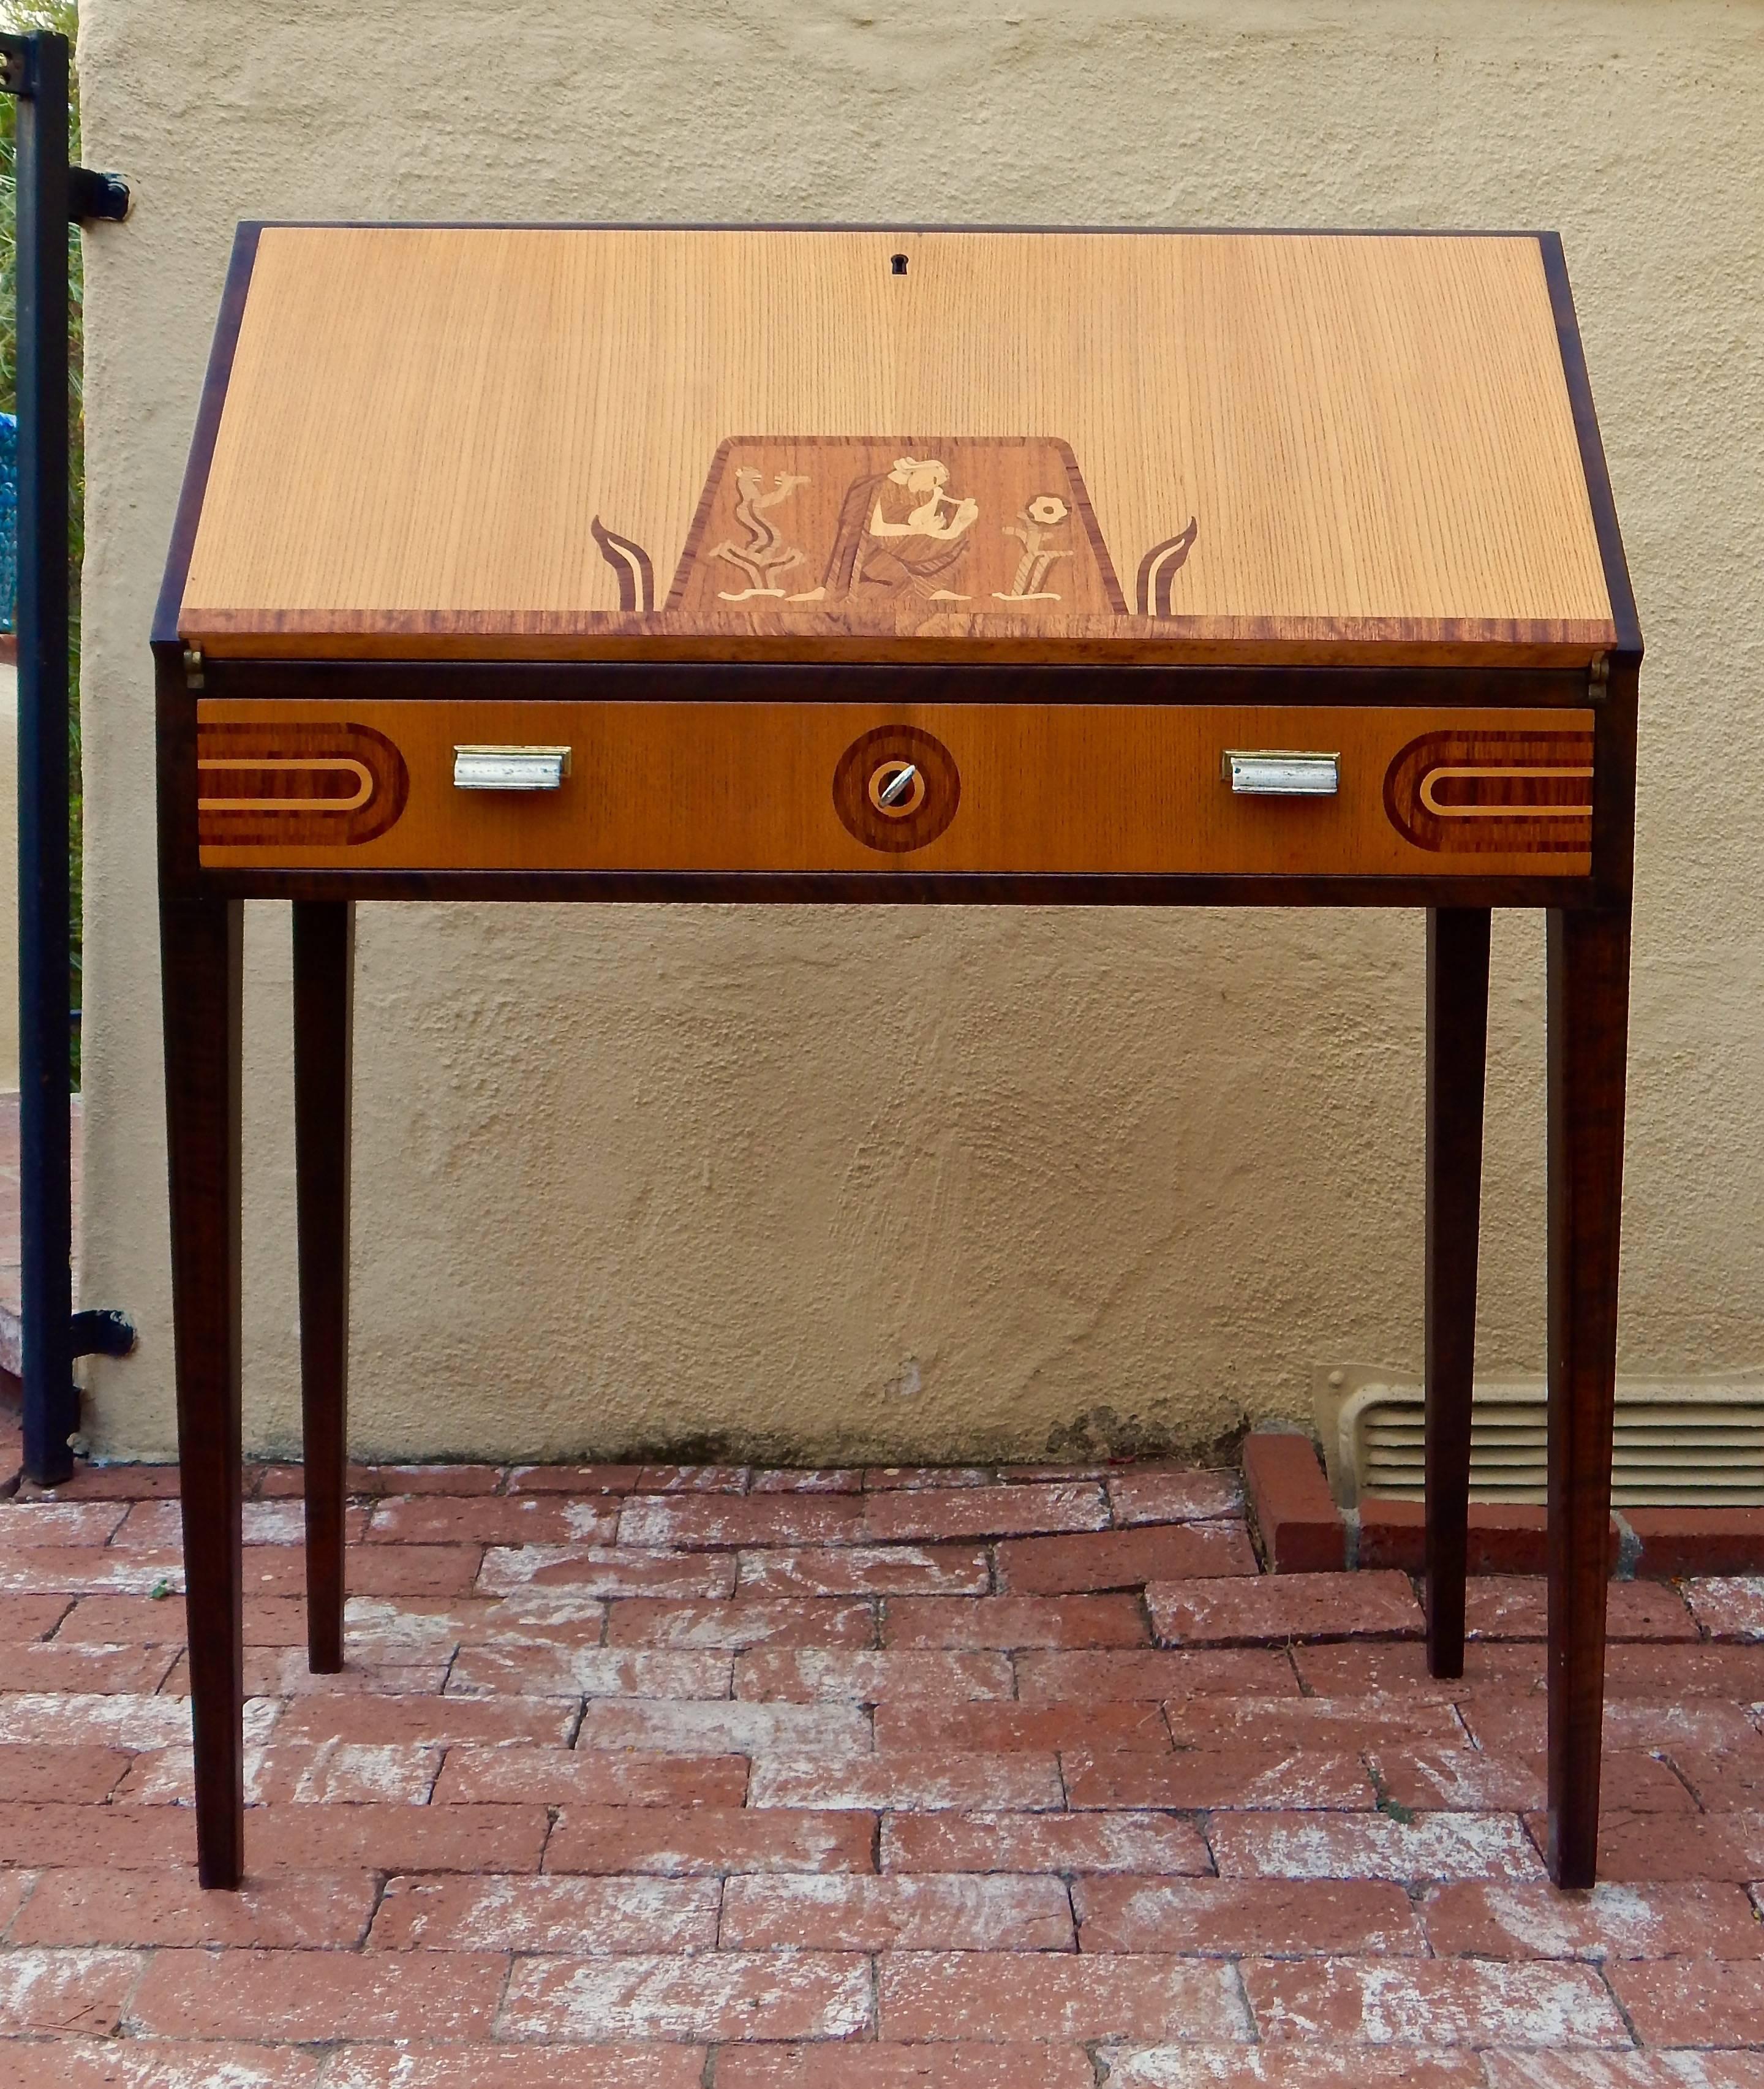 Swedish inlaid Art Deco or neoclassical drop front secretaire or desk. Made at Ferdinand Lundquist in Gothenburg, Sweden, circa 1920. Exterior case in elm an birch. Inlay woods include rosewood, mahogany and maple. Interior in flame birch and